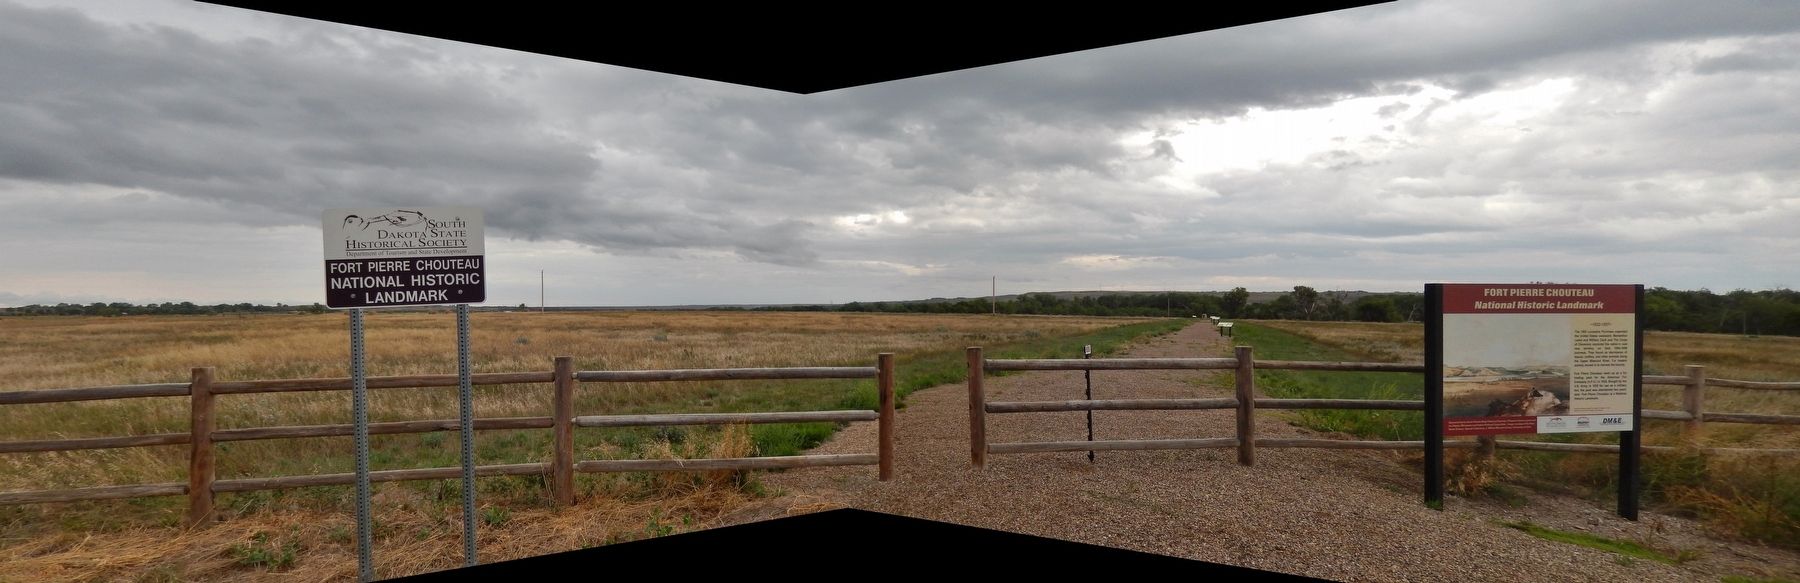 Fort Pierre Chouteau Marker (<i>panoramic view; National Historic Site behind marker</i>) image. Click for full size.